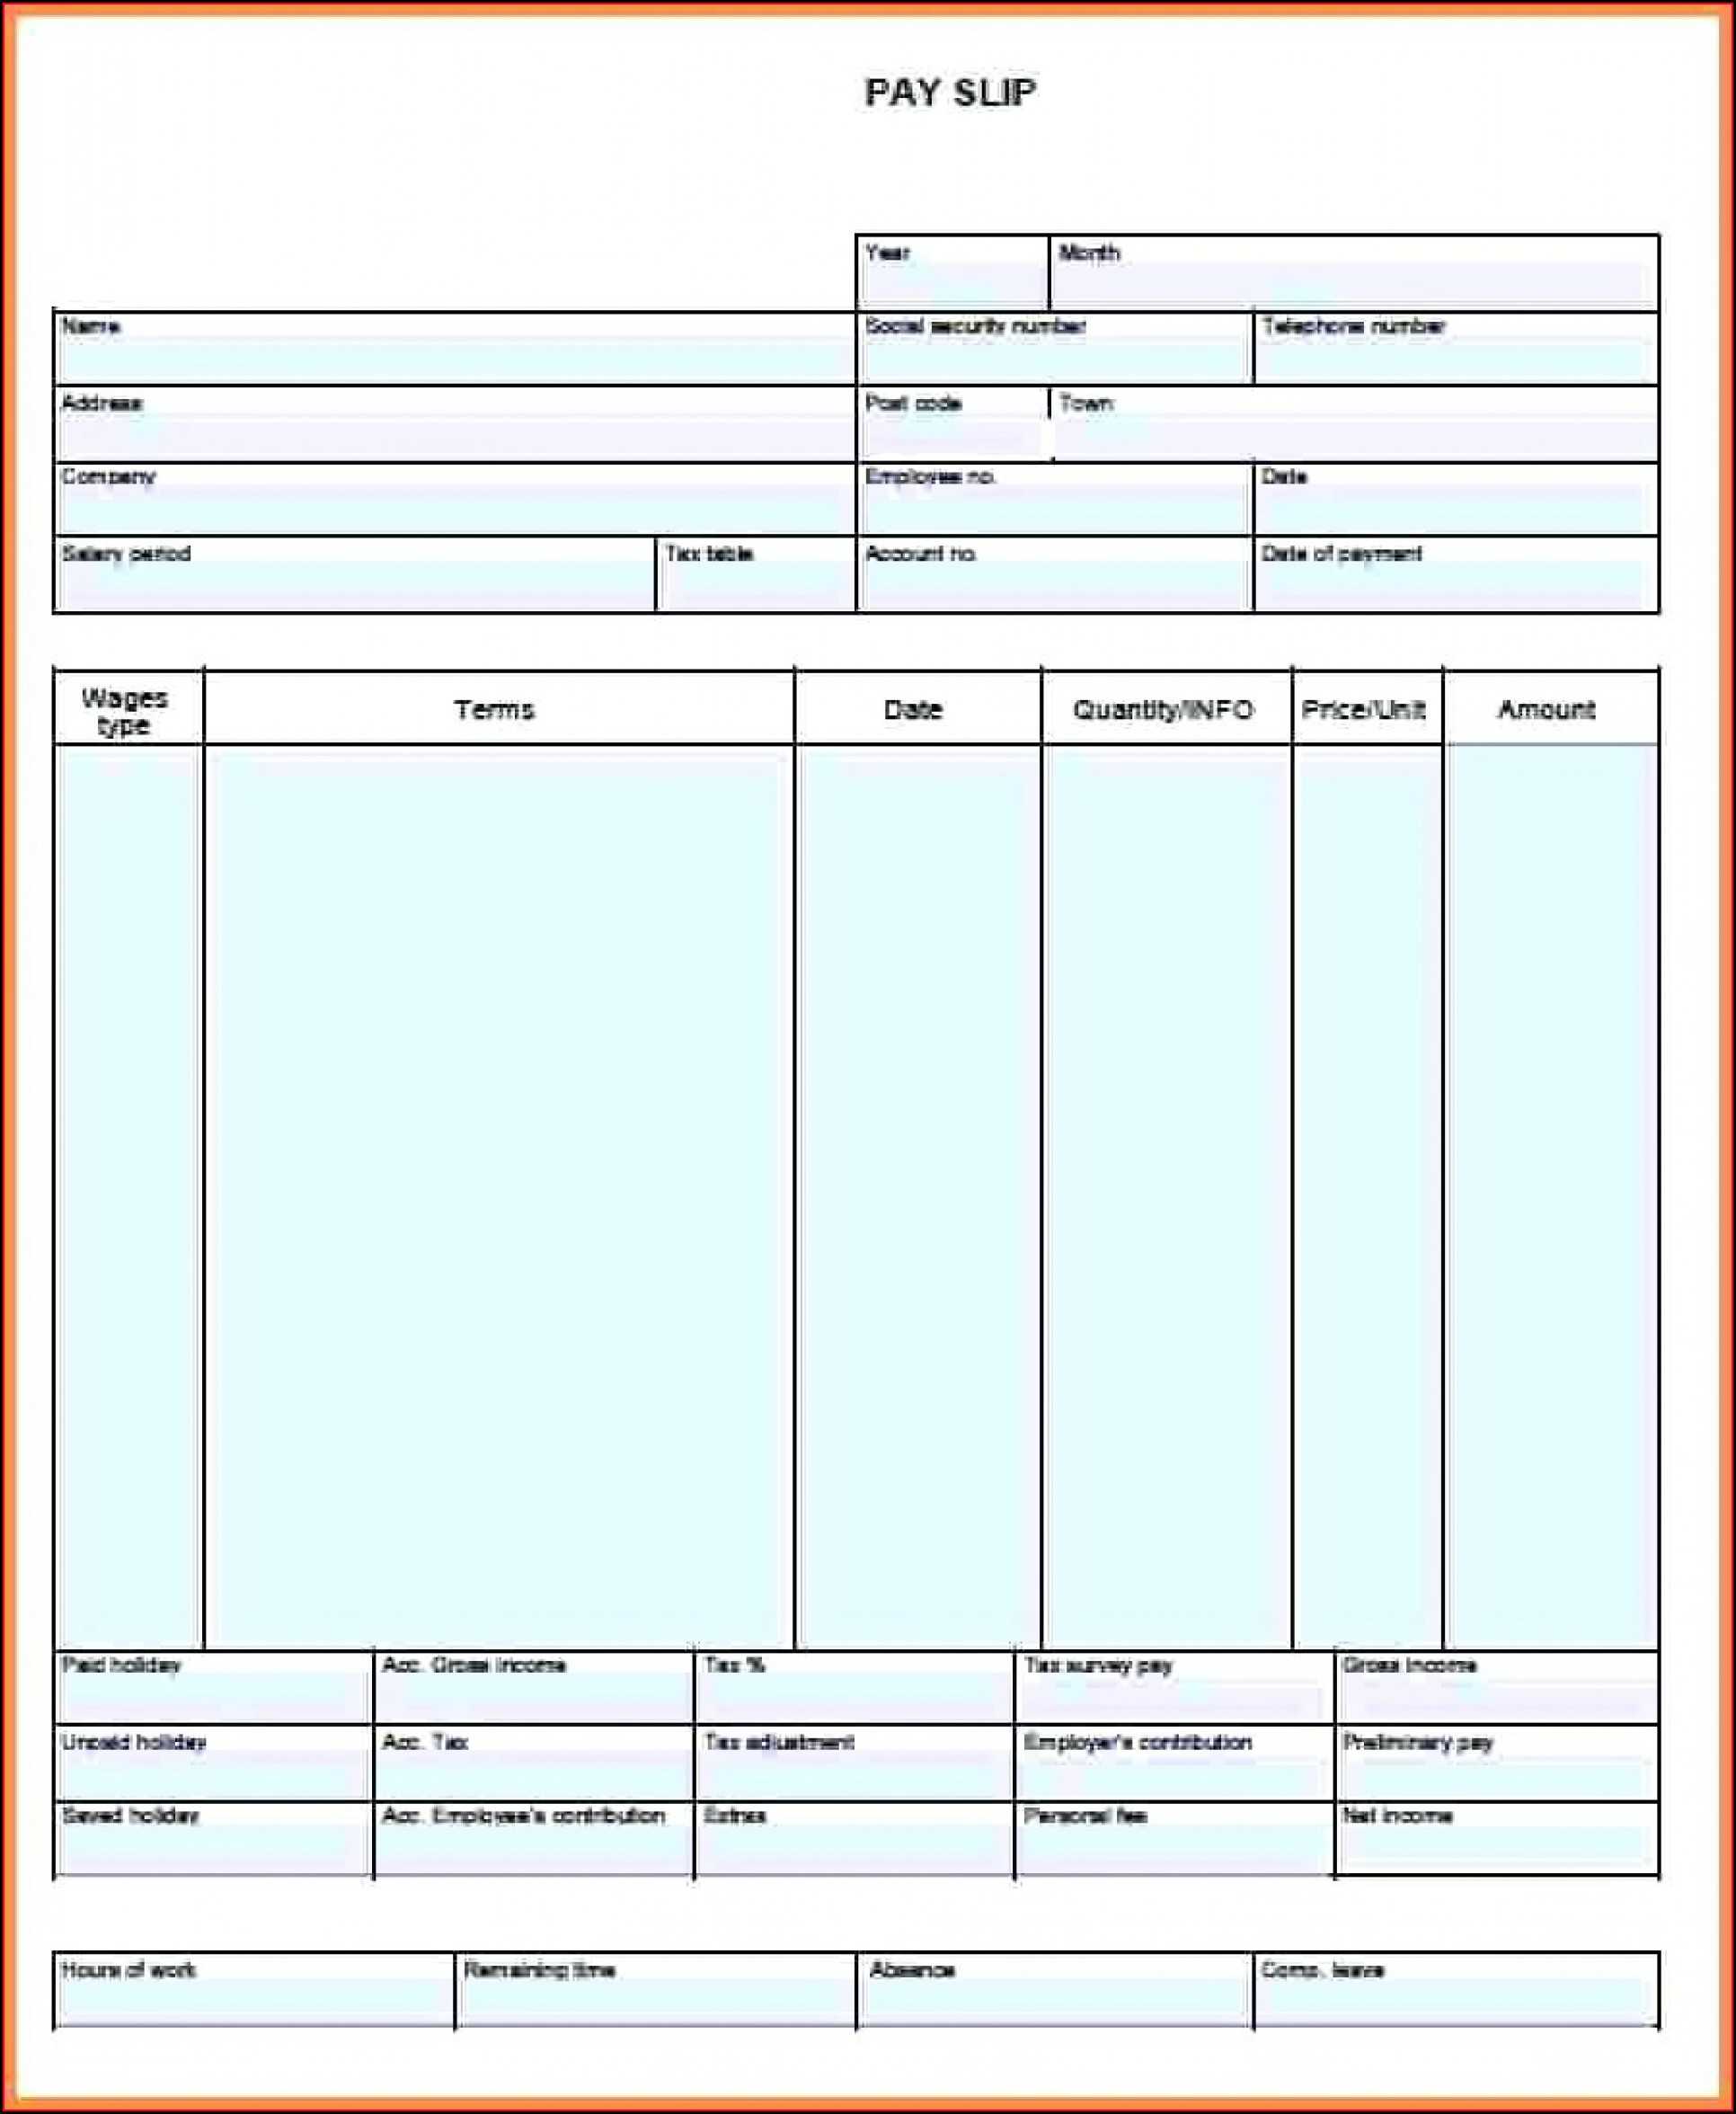 Adp Pay Stub Template Download – Template 1 : Resume Intended For Blank Pay Stub Template Word